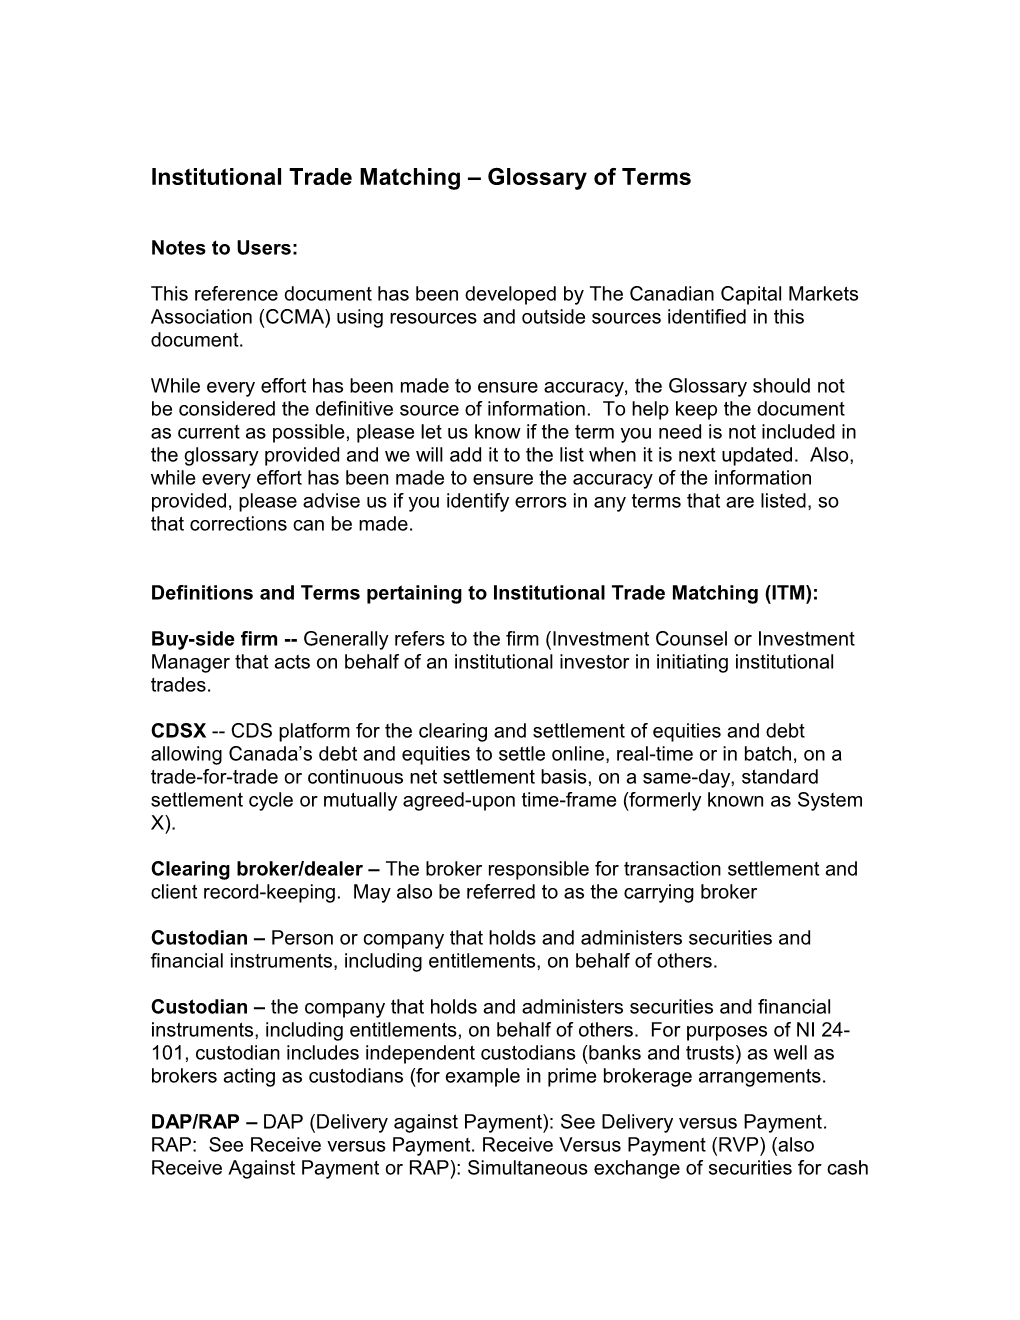 Definitions and Terms Pertaining to Institutional Trade Matching (ITM) (Under Development)